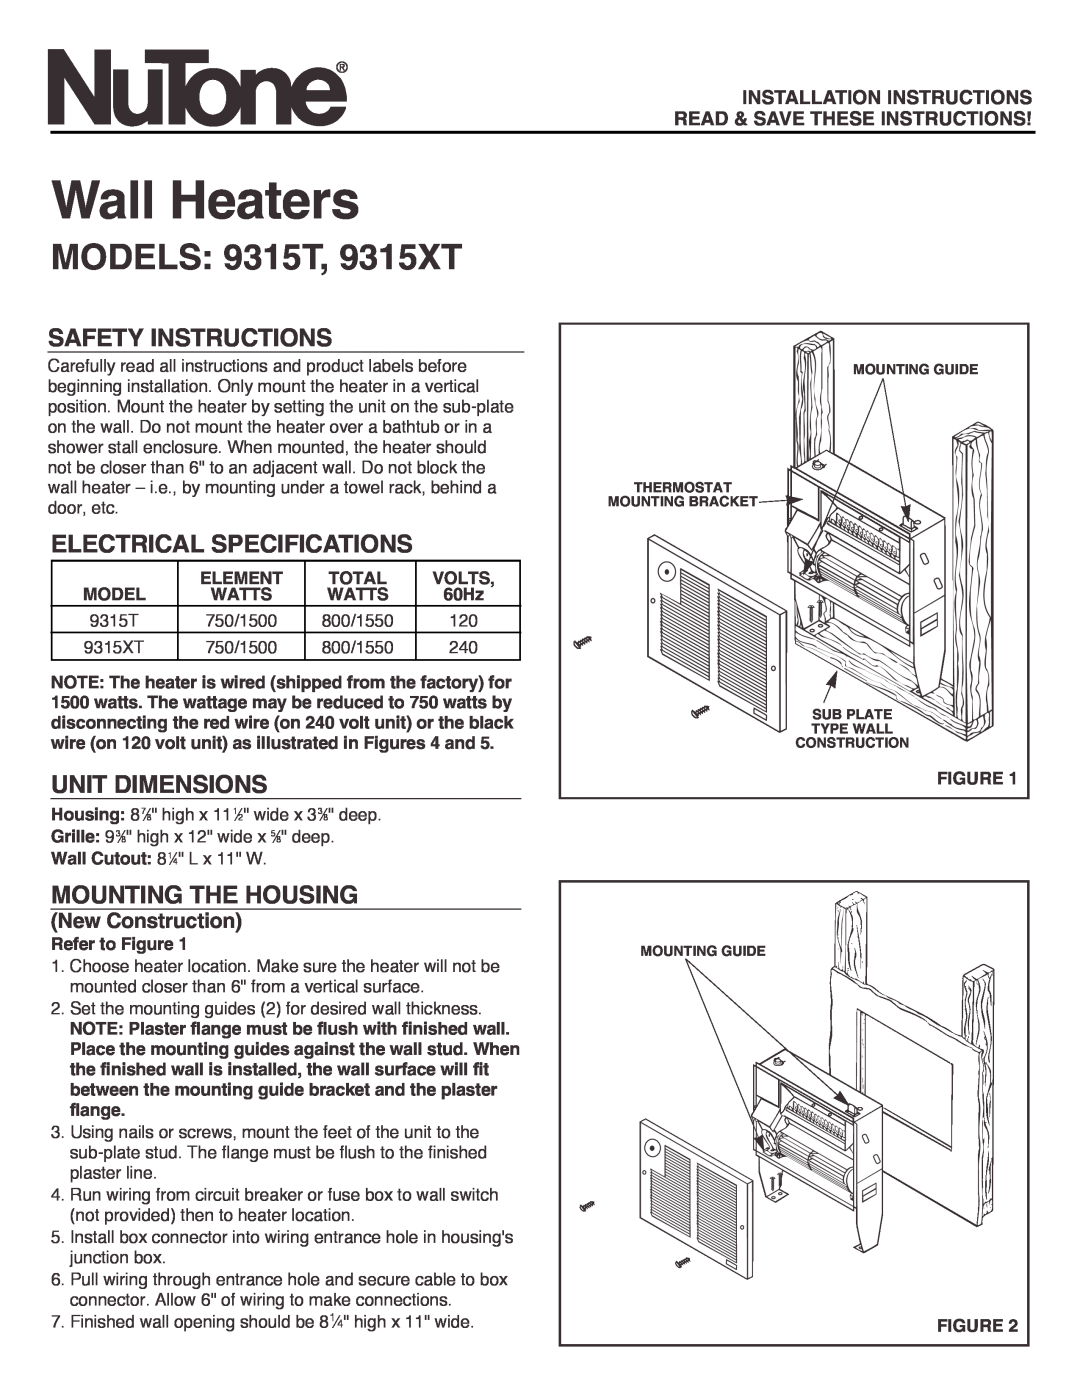 NuTone 9315T installation instructions Safety Instructions, Electrical Specifications, Unit Dimensions, New Construction 